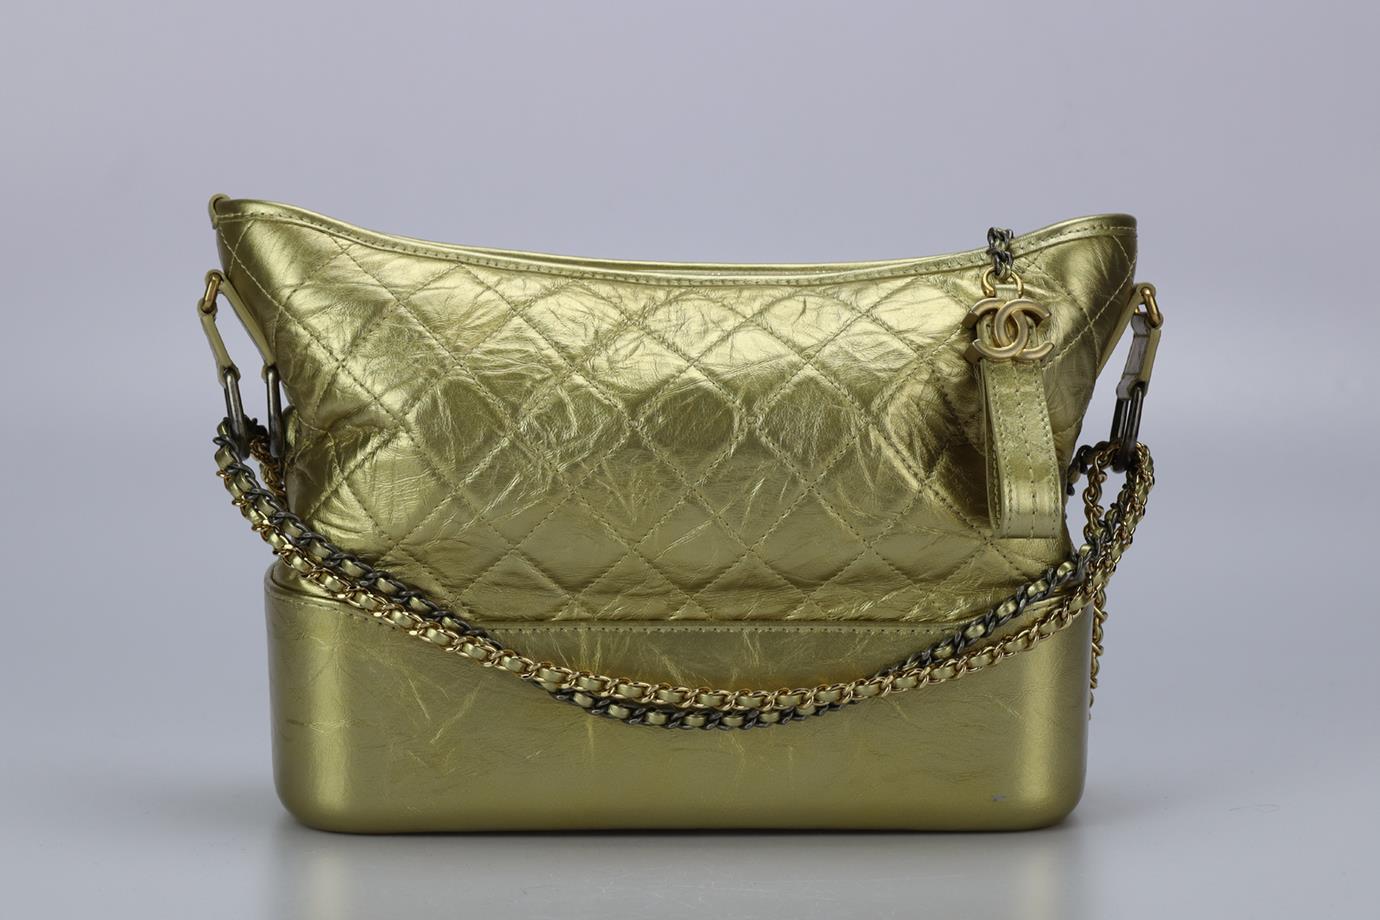 Chanel 2017 Gabrielle Large Quilted Leather Shoulder Bag. Gold. Zip fastening - Top. Comes with - dustbag and authenticity card. Length: 10.6 in. Width: 7.8 in. Depth: 3.9 in. Strap drop:17.7 in. Condition: Used. Very good condition - Few light